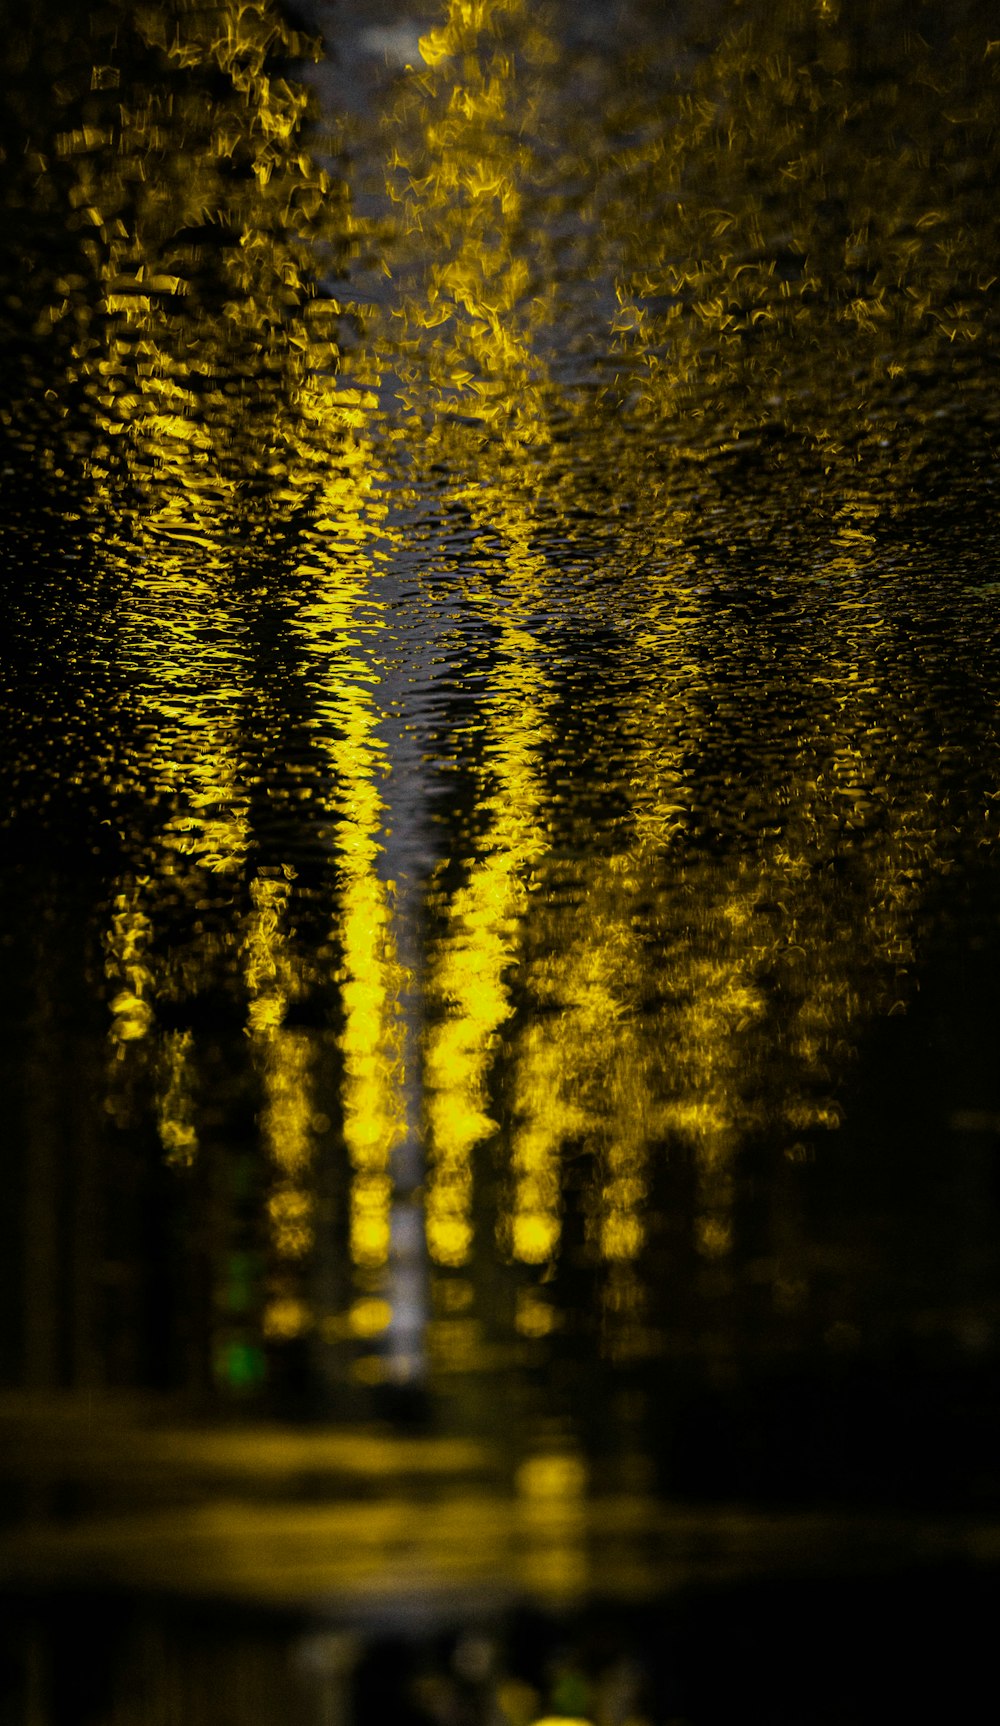 the reflection of a street light in the water